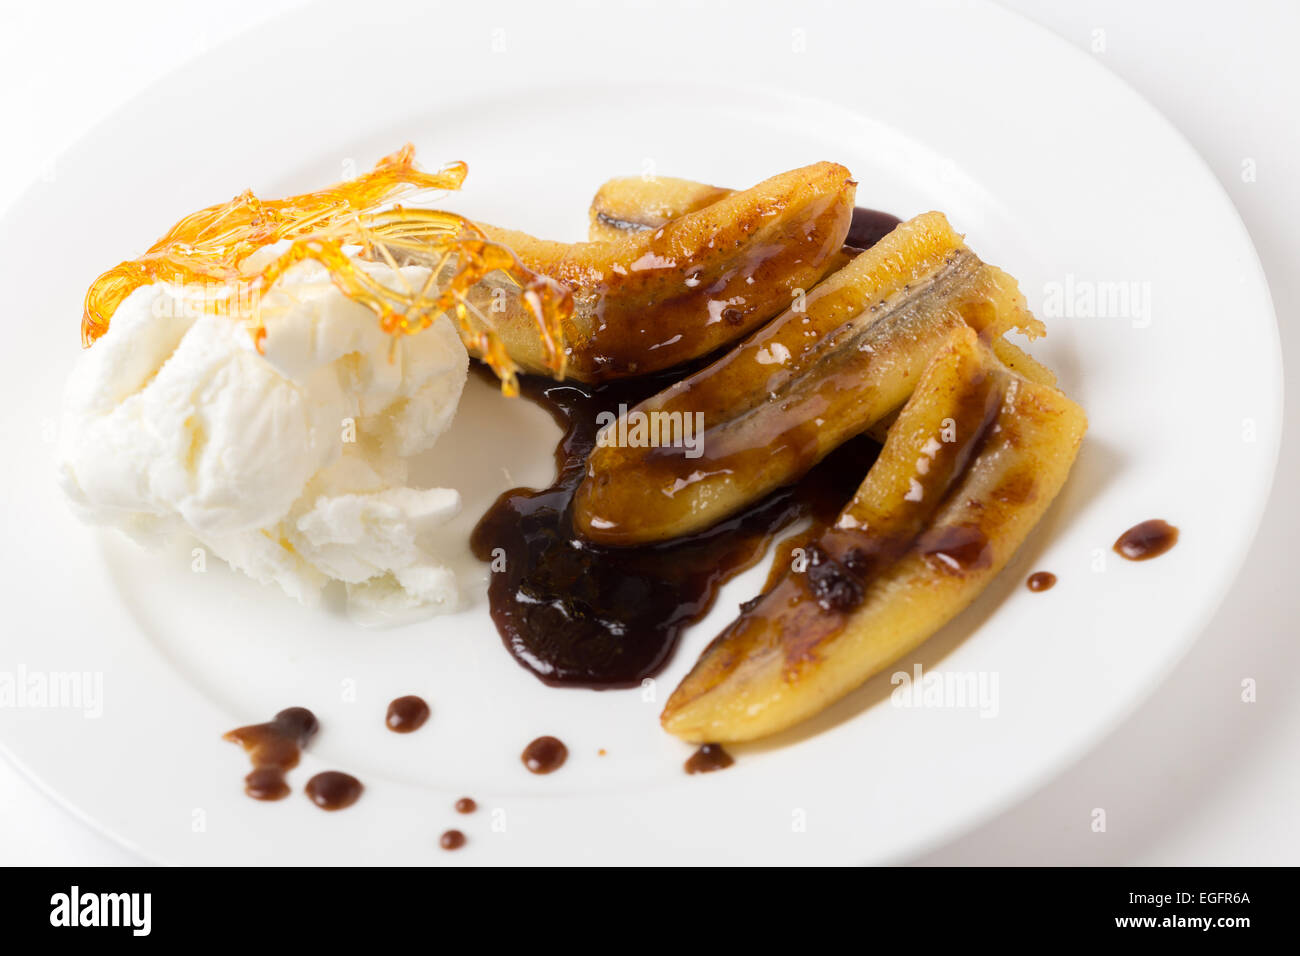 Fried bananas with a toffee sauce, ice cream and a caramelised sugar decoration. Stock Photo